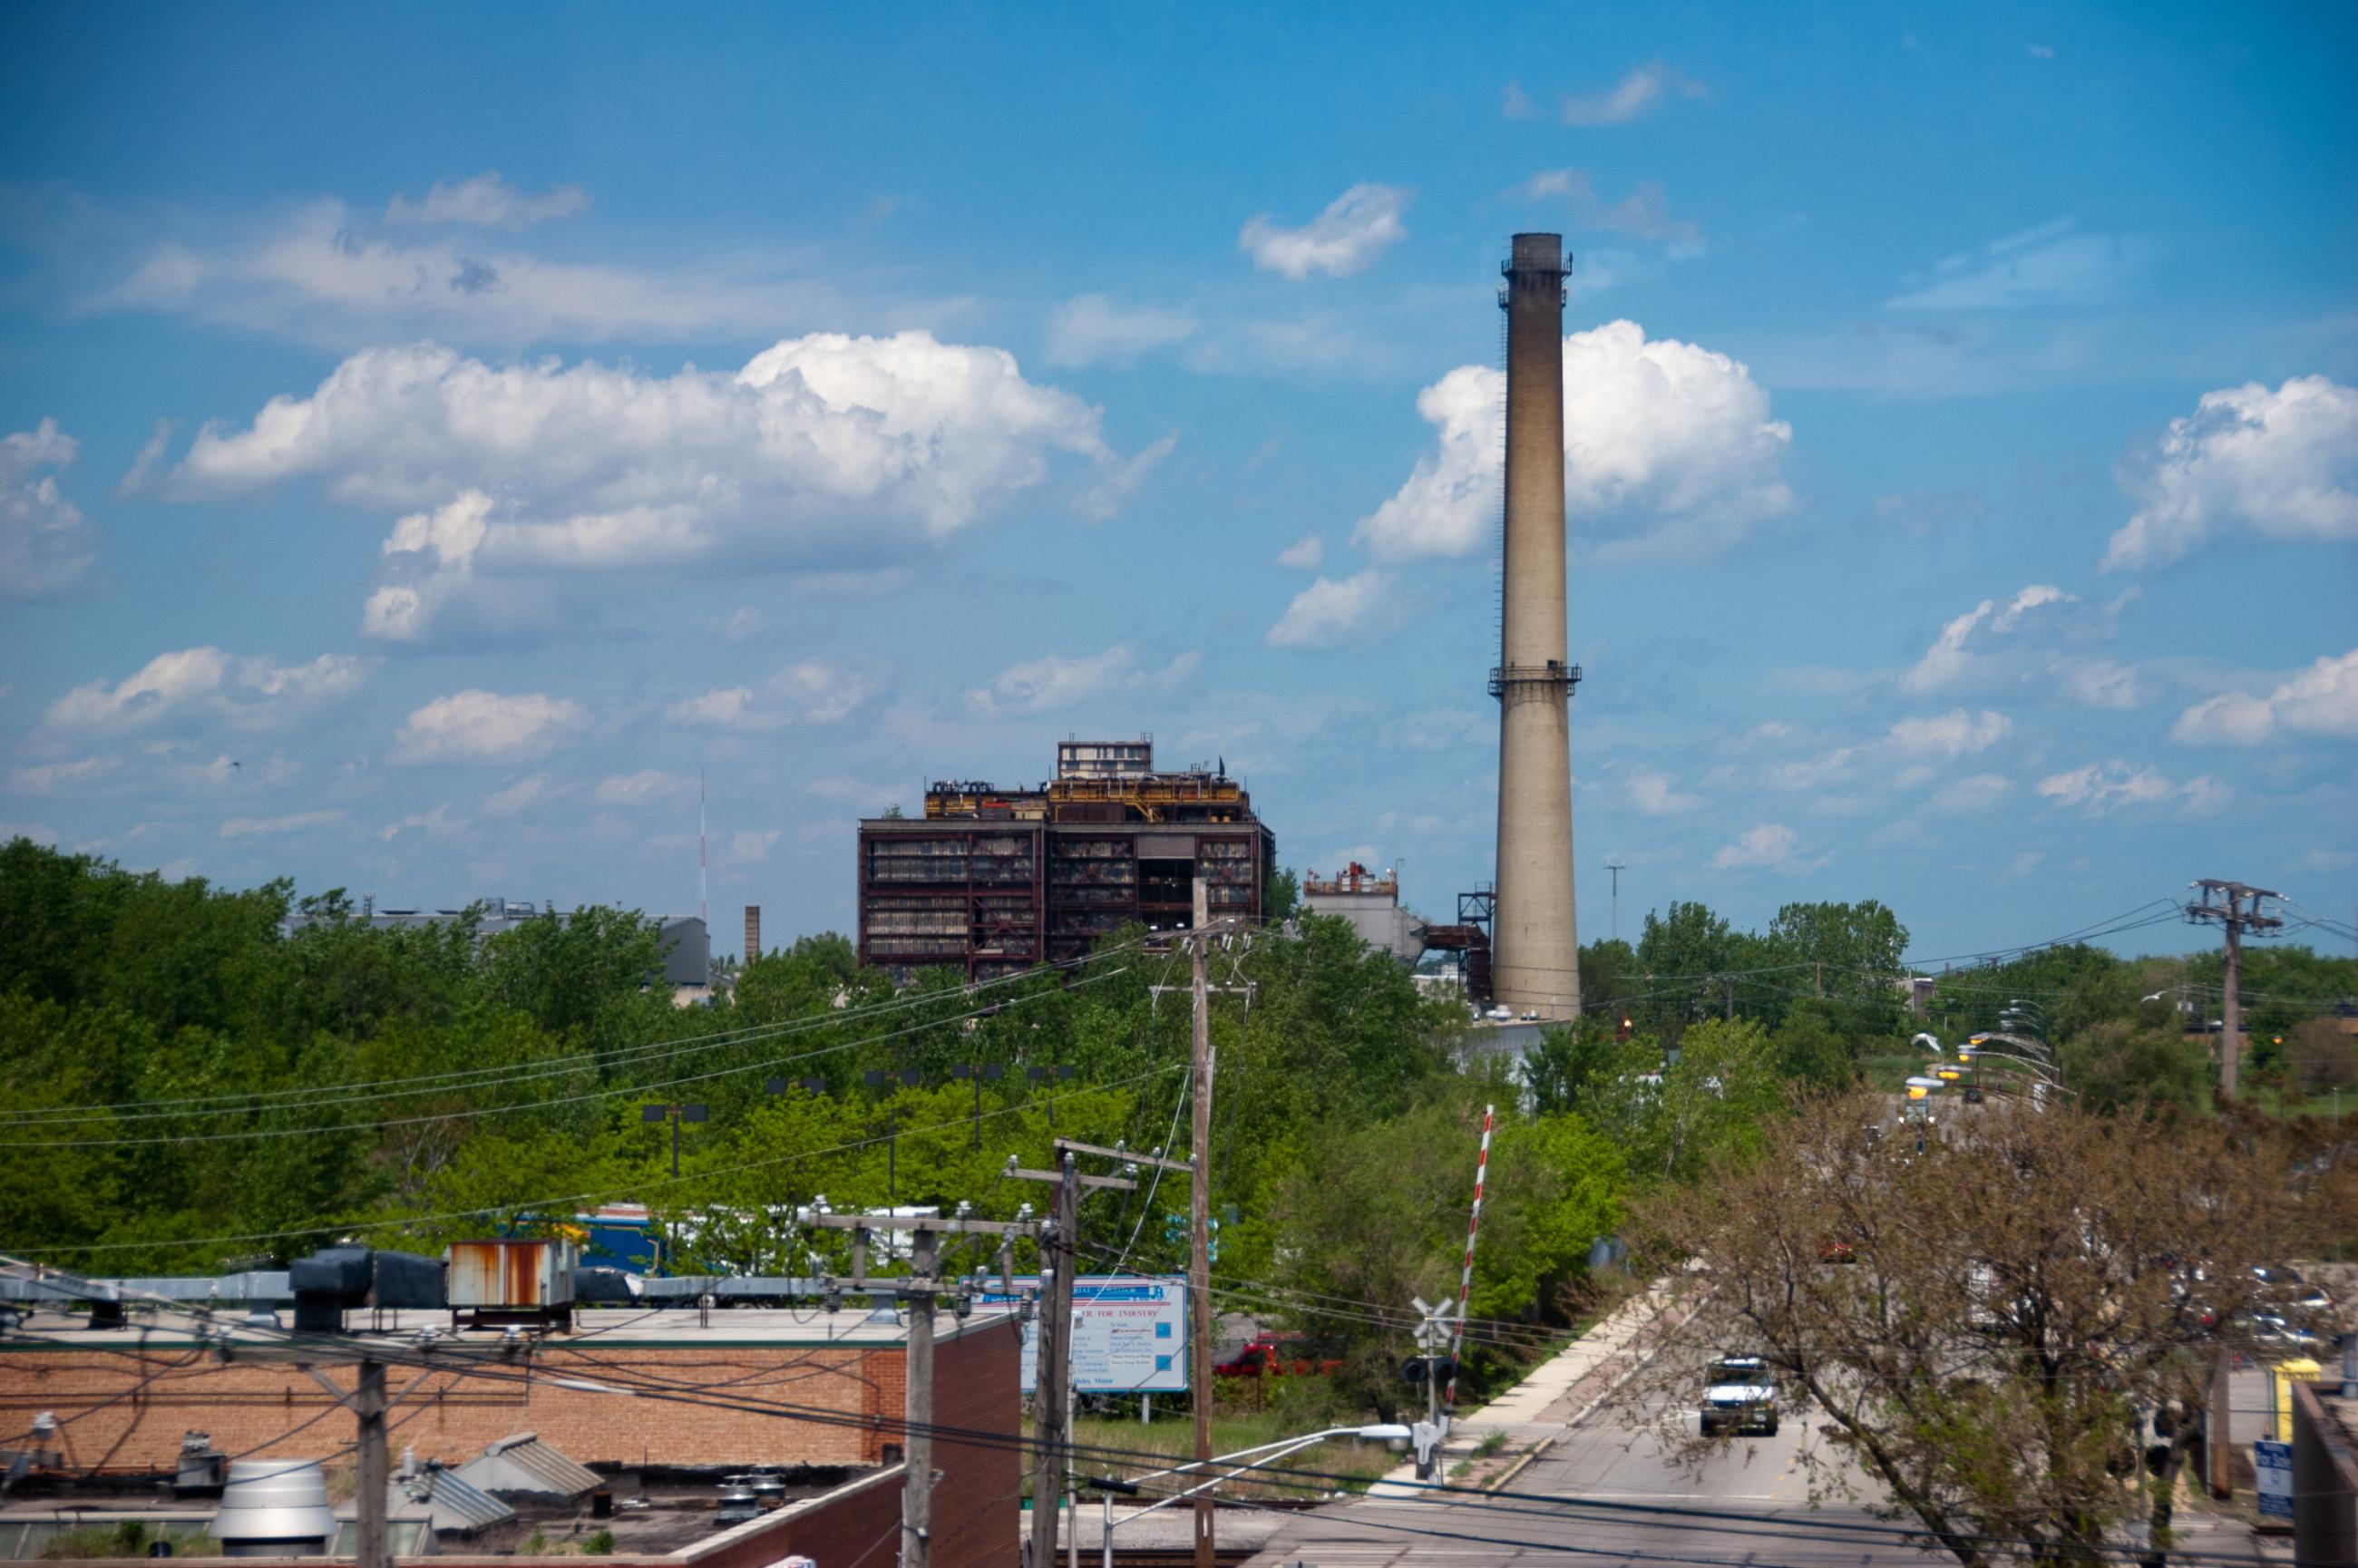 Chicago’s Northwest Incinerator, decommissioned in 1996. Credit Eric Allix Rogers via Flicklr CC BY-NC-ND 2.0